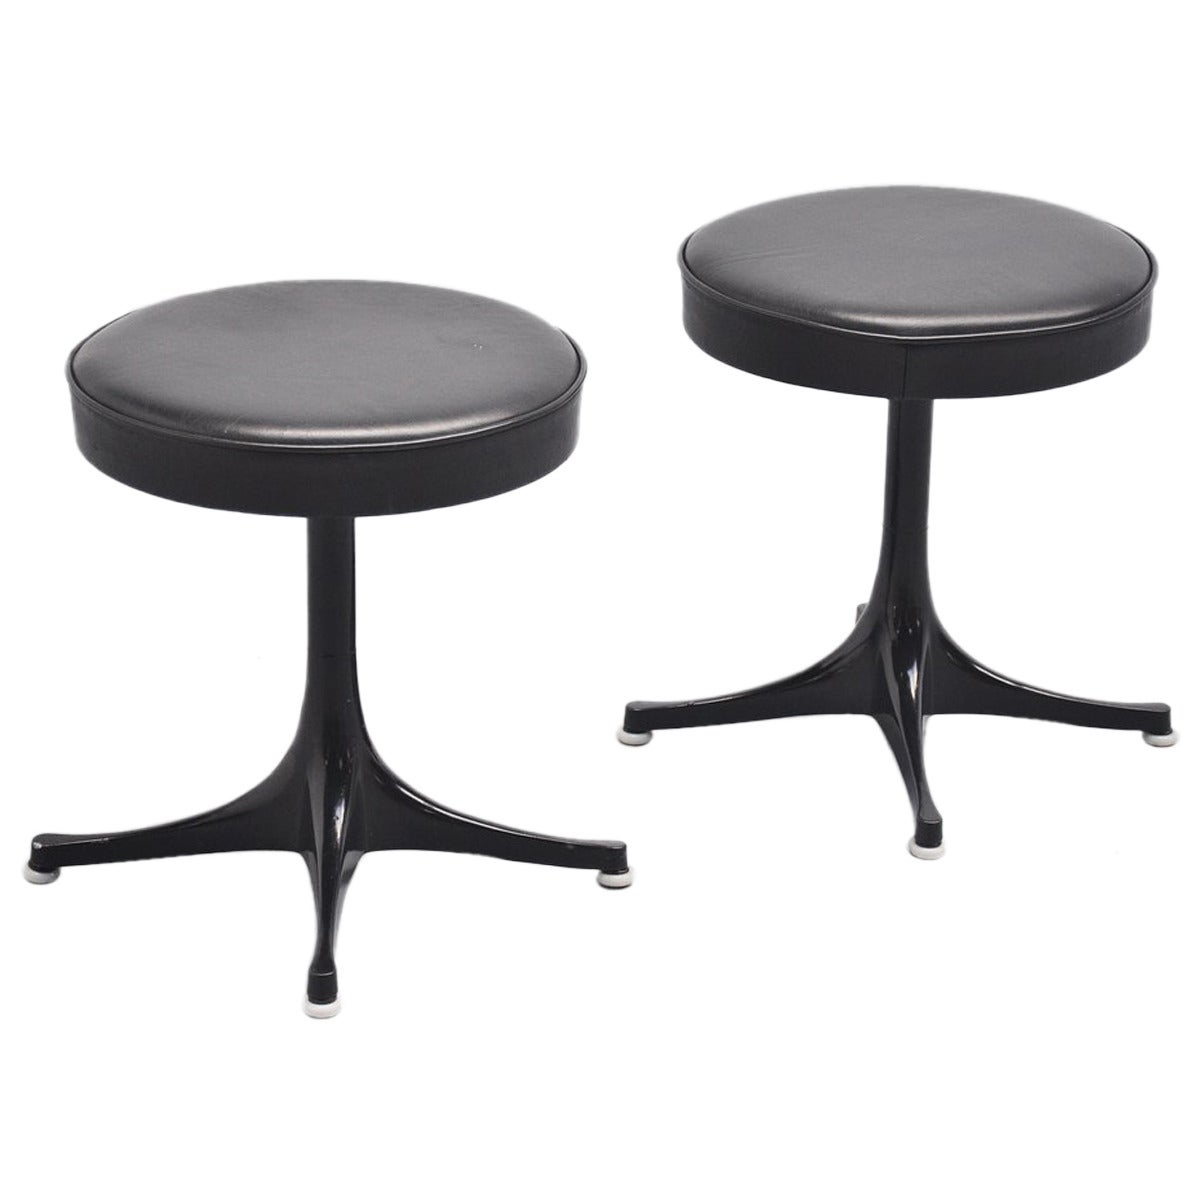 George Nelson pair of stools for Herman Miller 1955